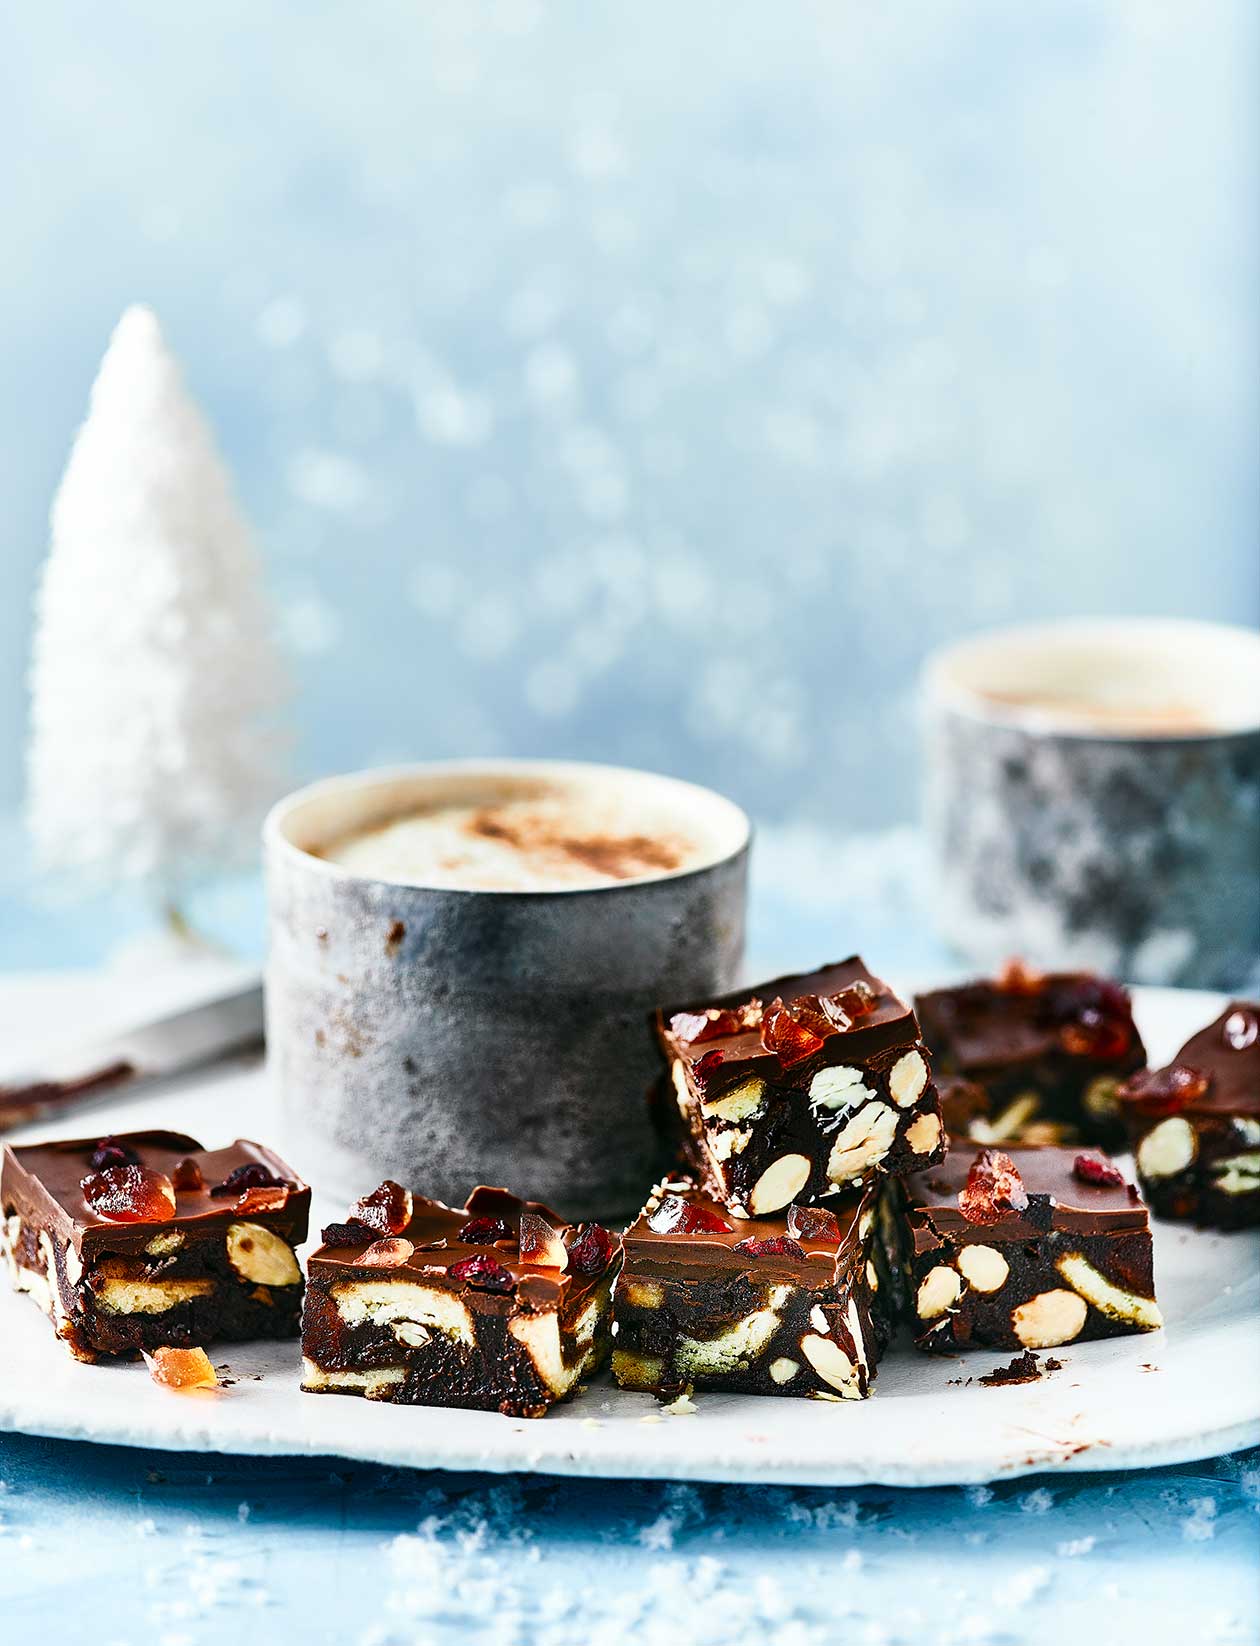 Irresistible Chocolate Tiffin with Crunchie - Amy Treasure